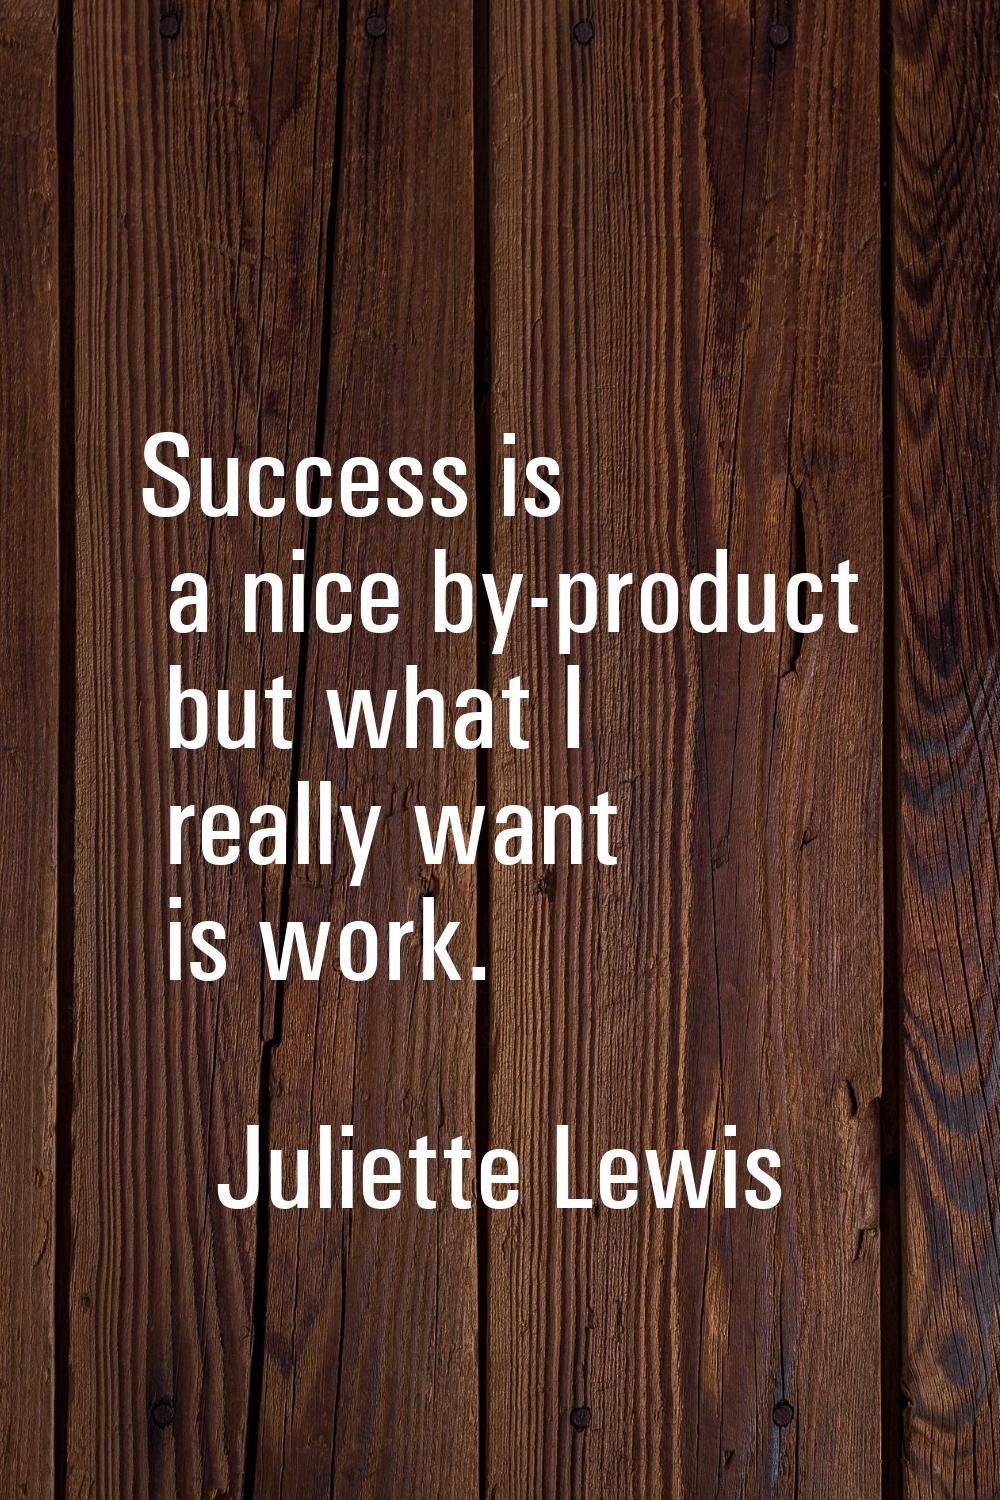 Success is a nice by-product but what I really want is work.